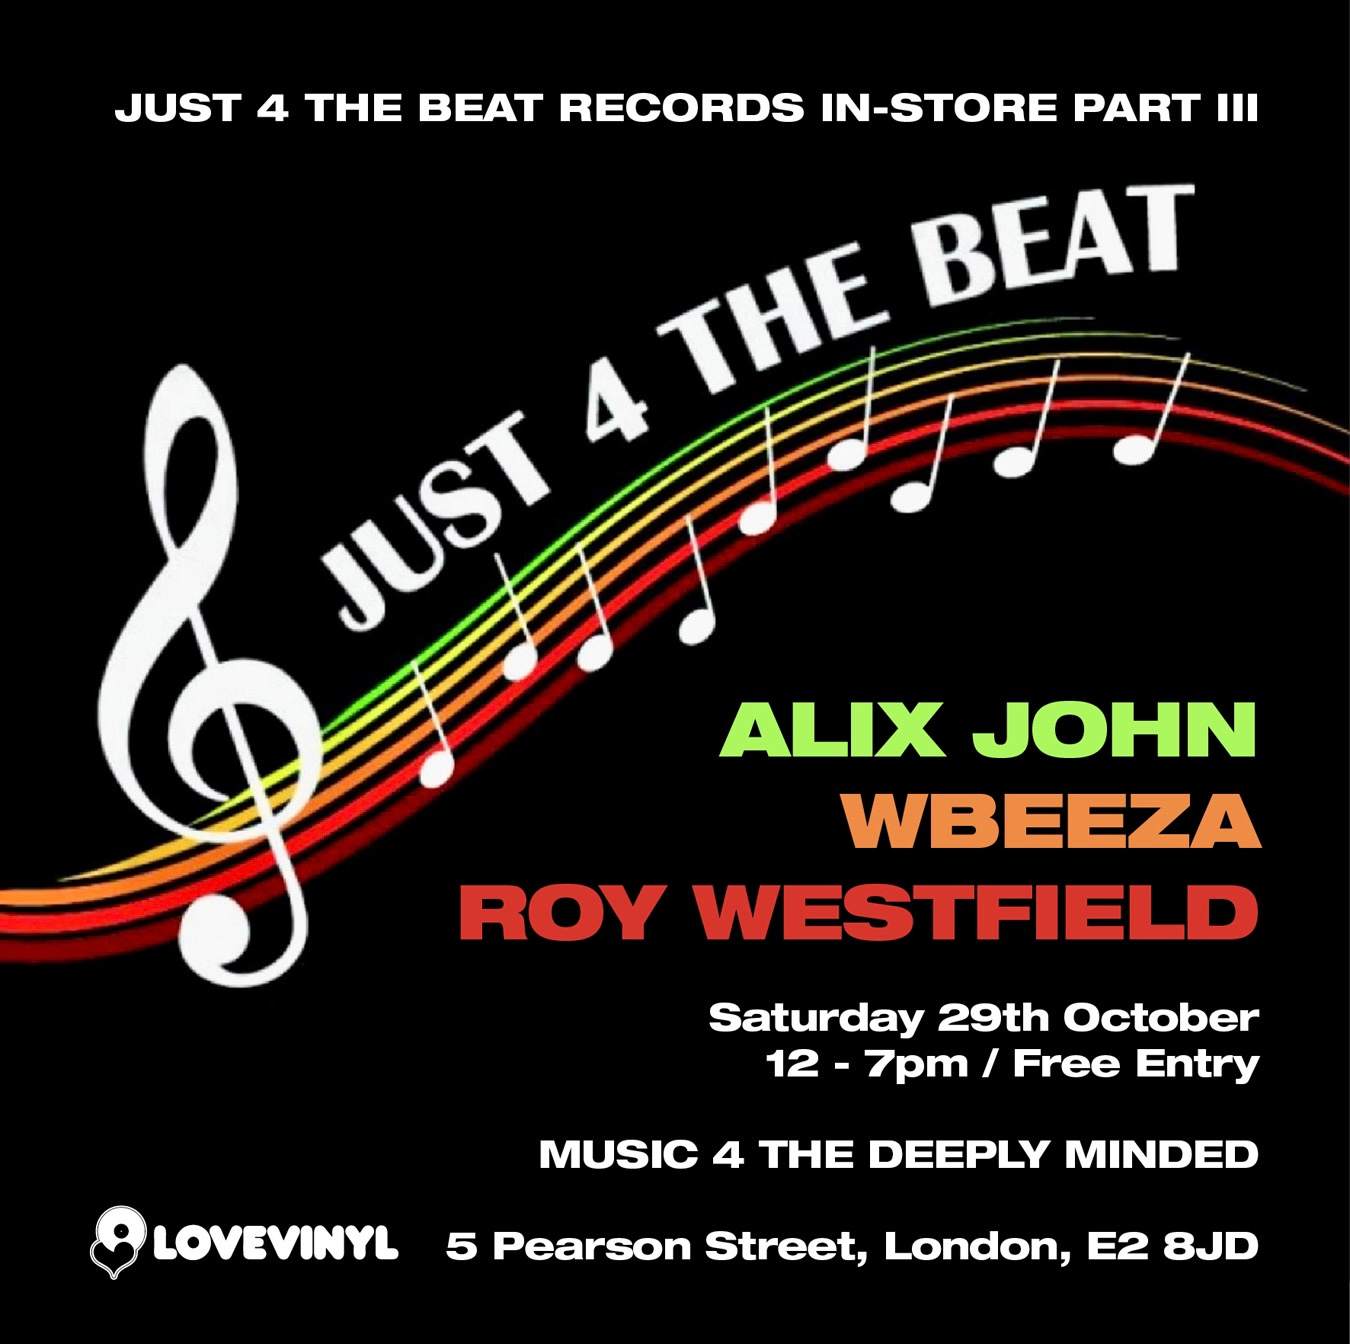 Just 4 The Beat in-store sessions - Página frontal